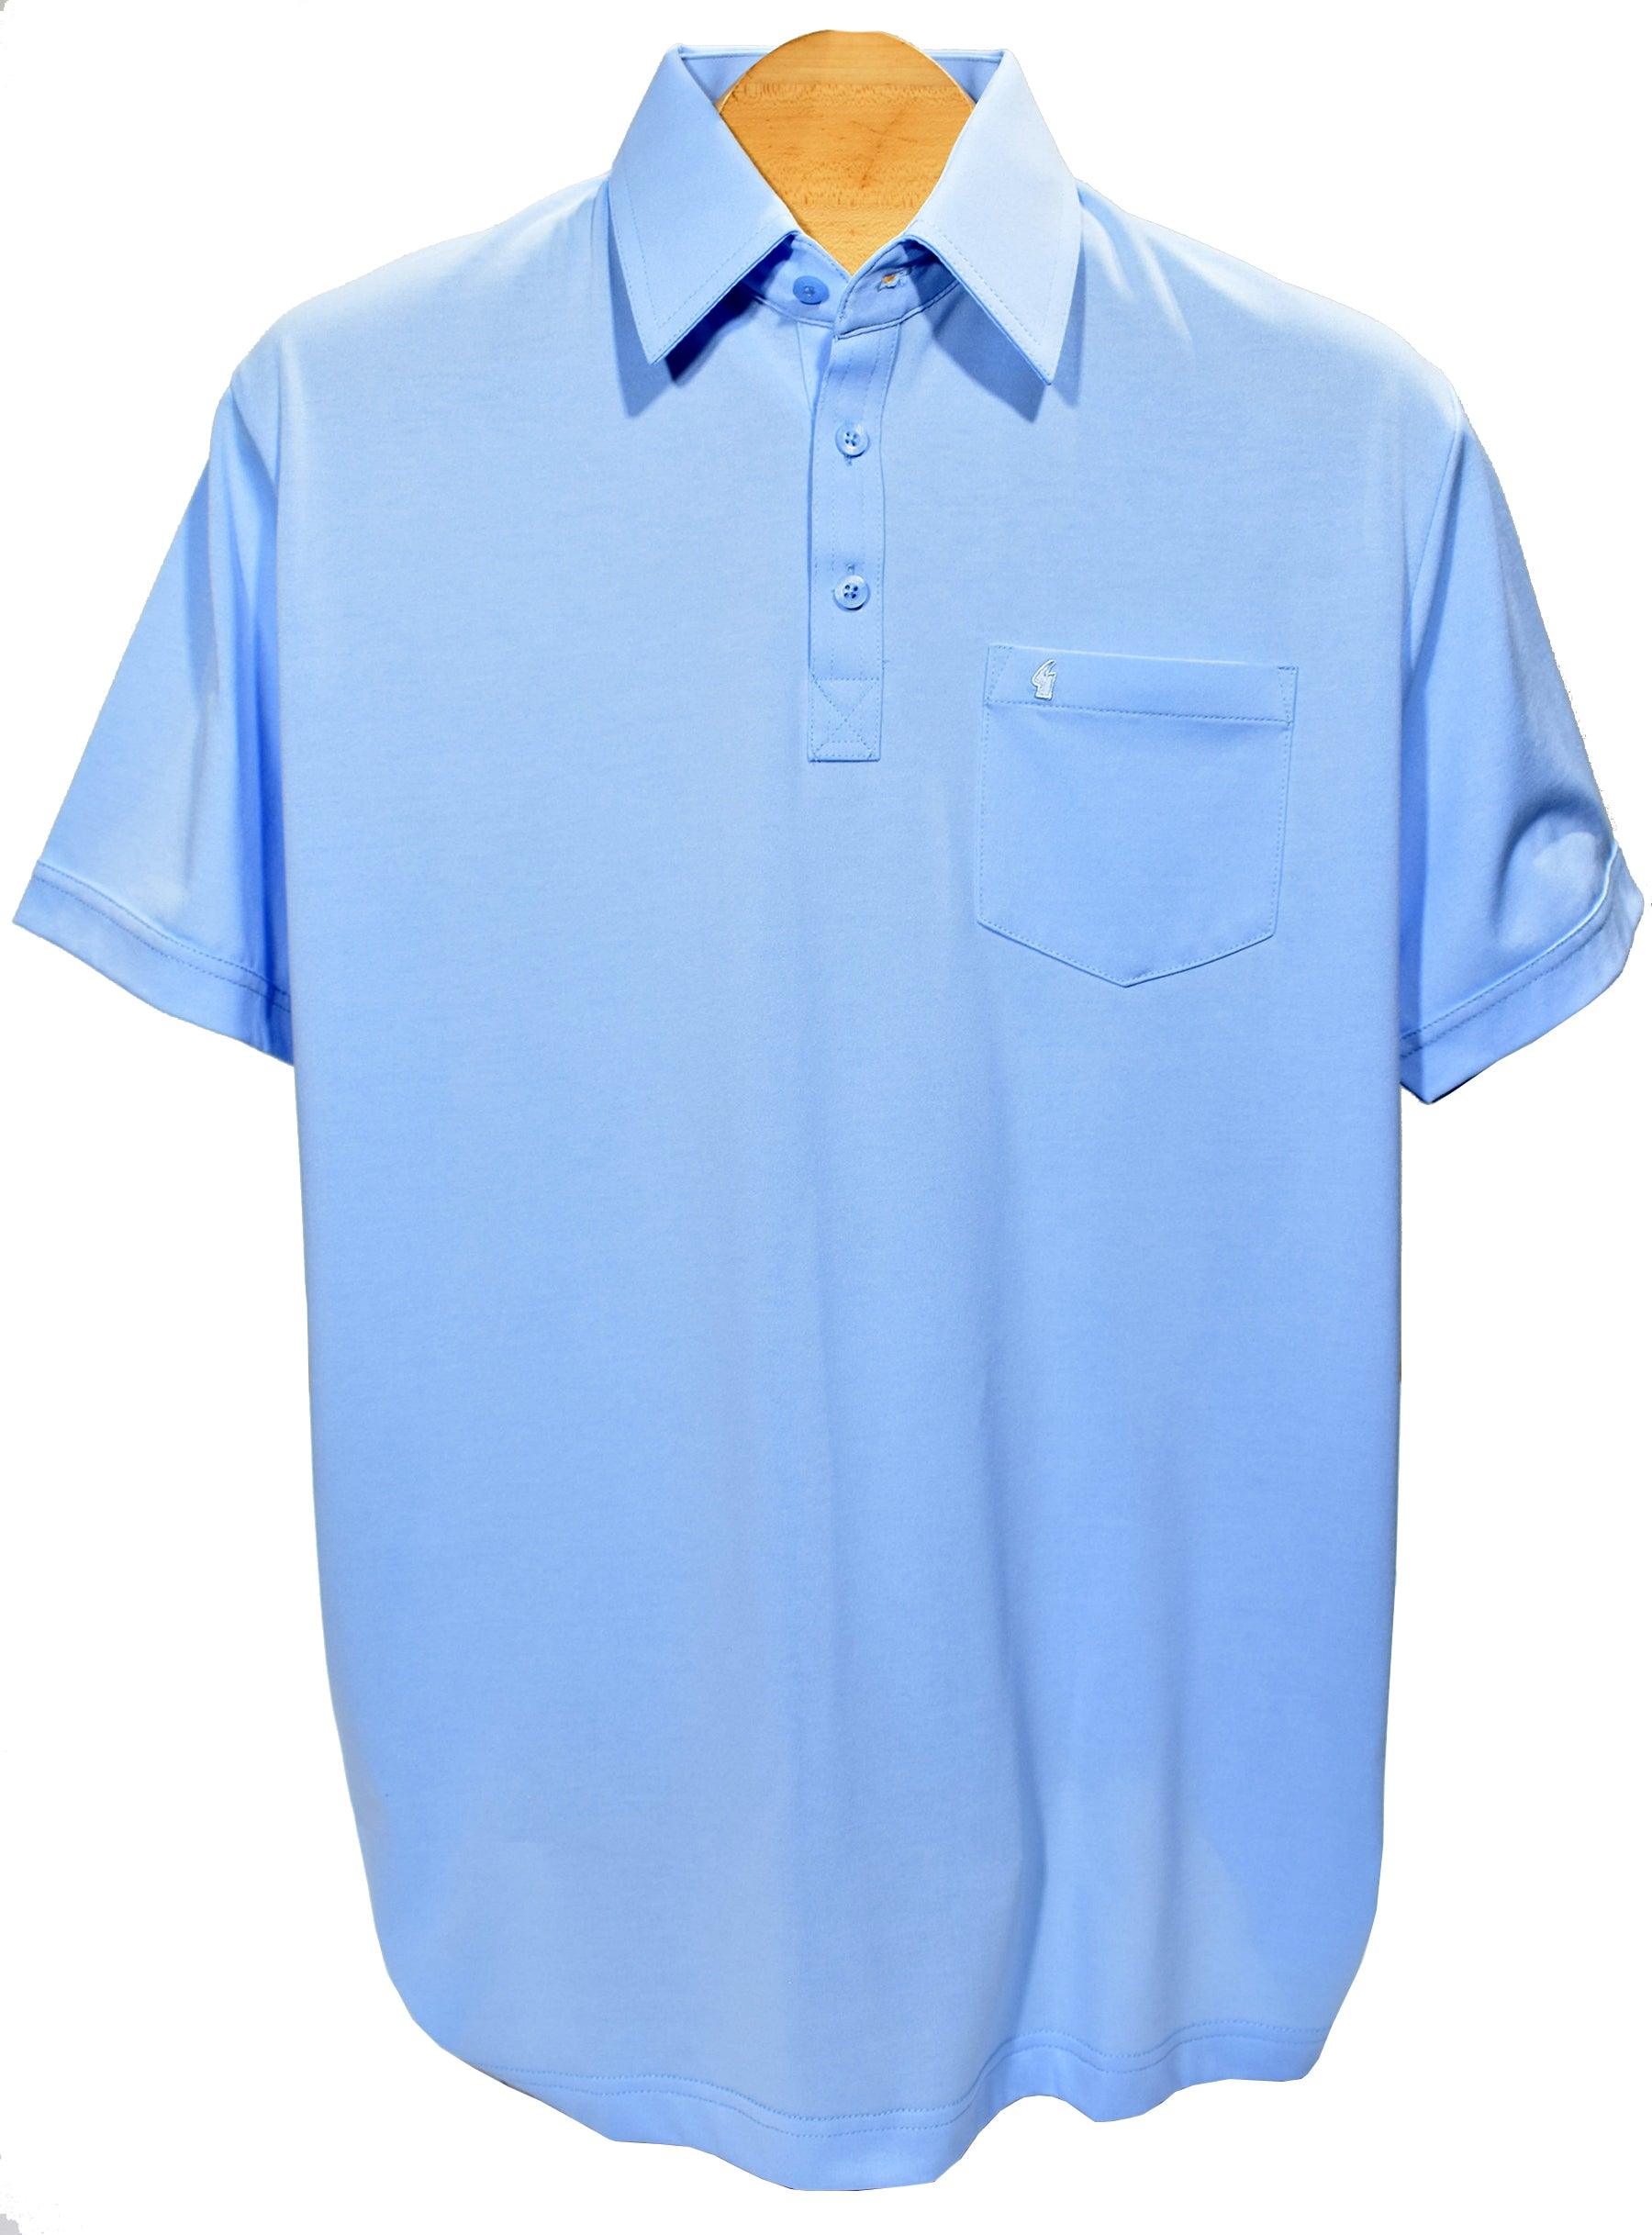 Gabicci finely plaited polo shirt combines soft cotton on the outside for soft comfort feel and a light polyester microfiber on the outside to wick away moisture and add wrinkle free traits.